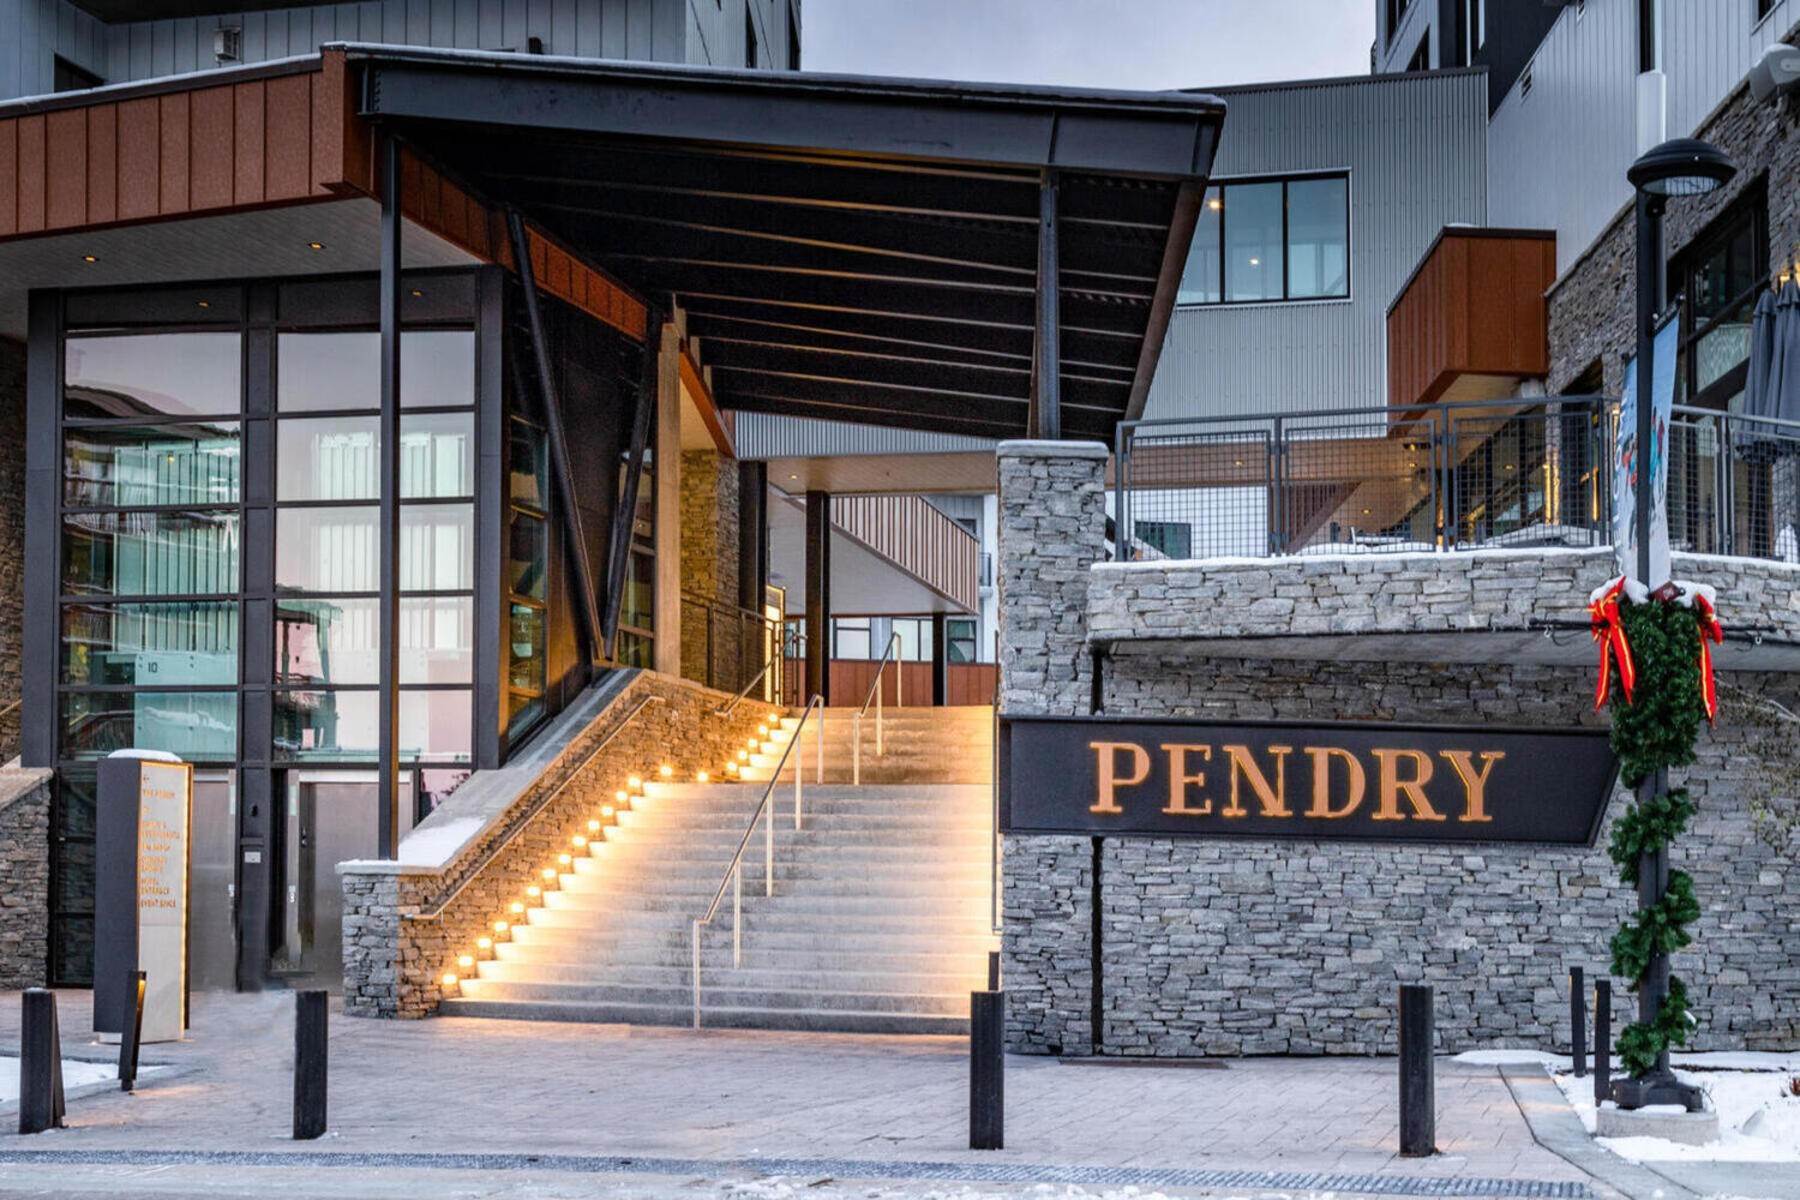 Property for Sale at Luxurious 3-Bedroom Lock-off Townhouse at Pendry Park City Hotel 2417 W High Mountain Road, #2109 Park City, Utah 84098 United States